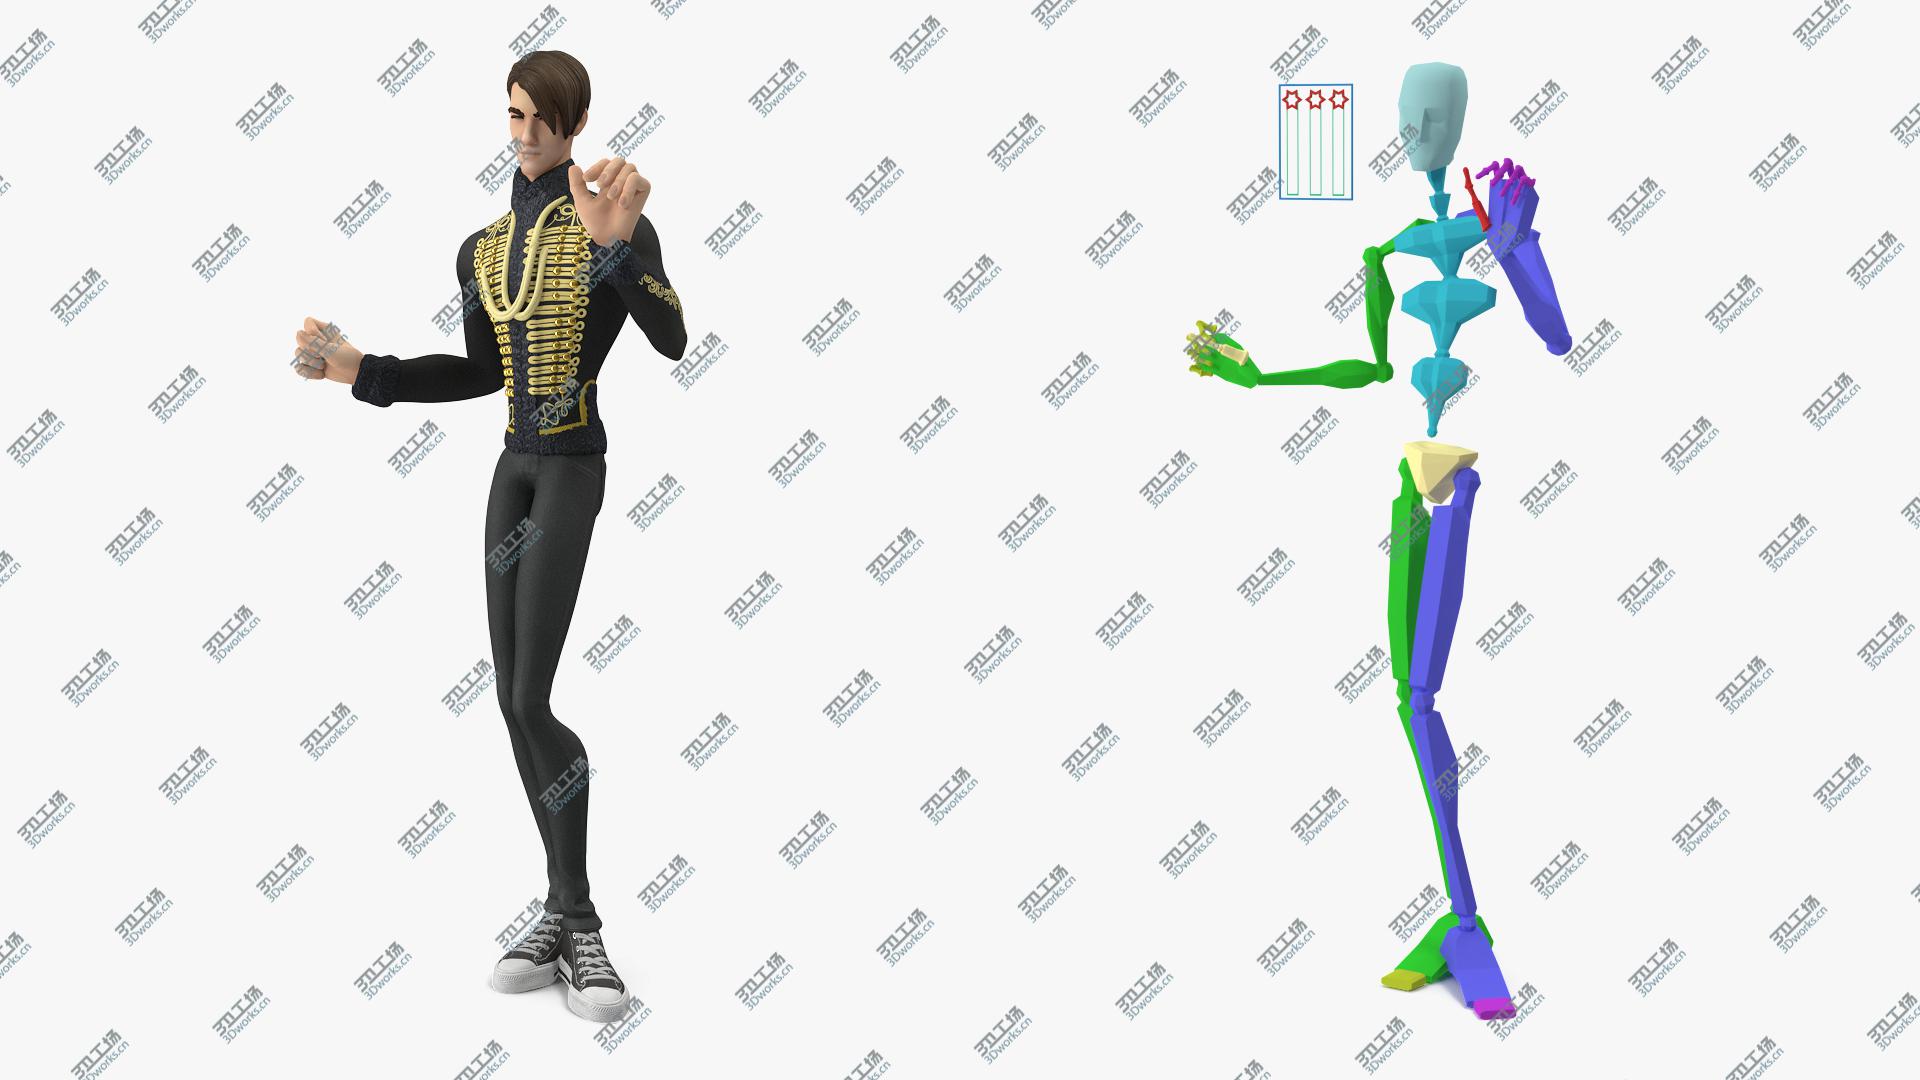 images/goods_img/202104093/Cartoon Man in Cavalry Jacket Rigged 3D model/2.jpg